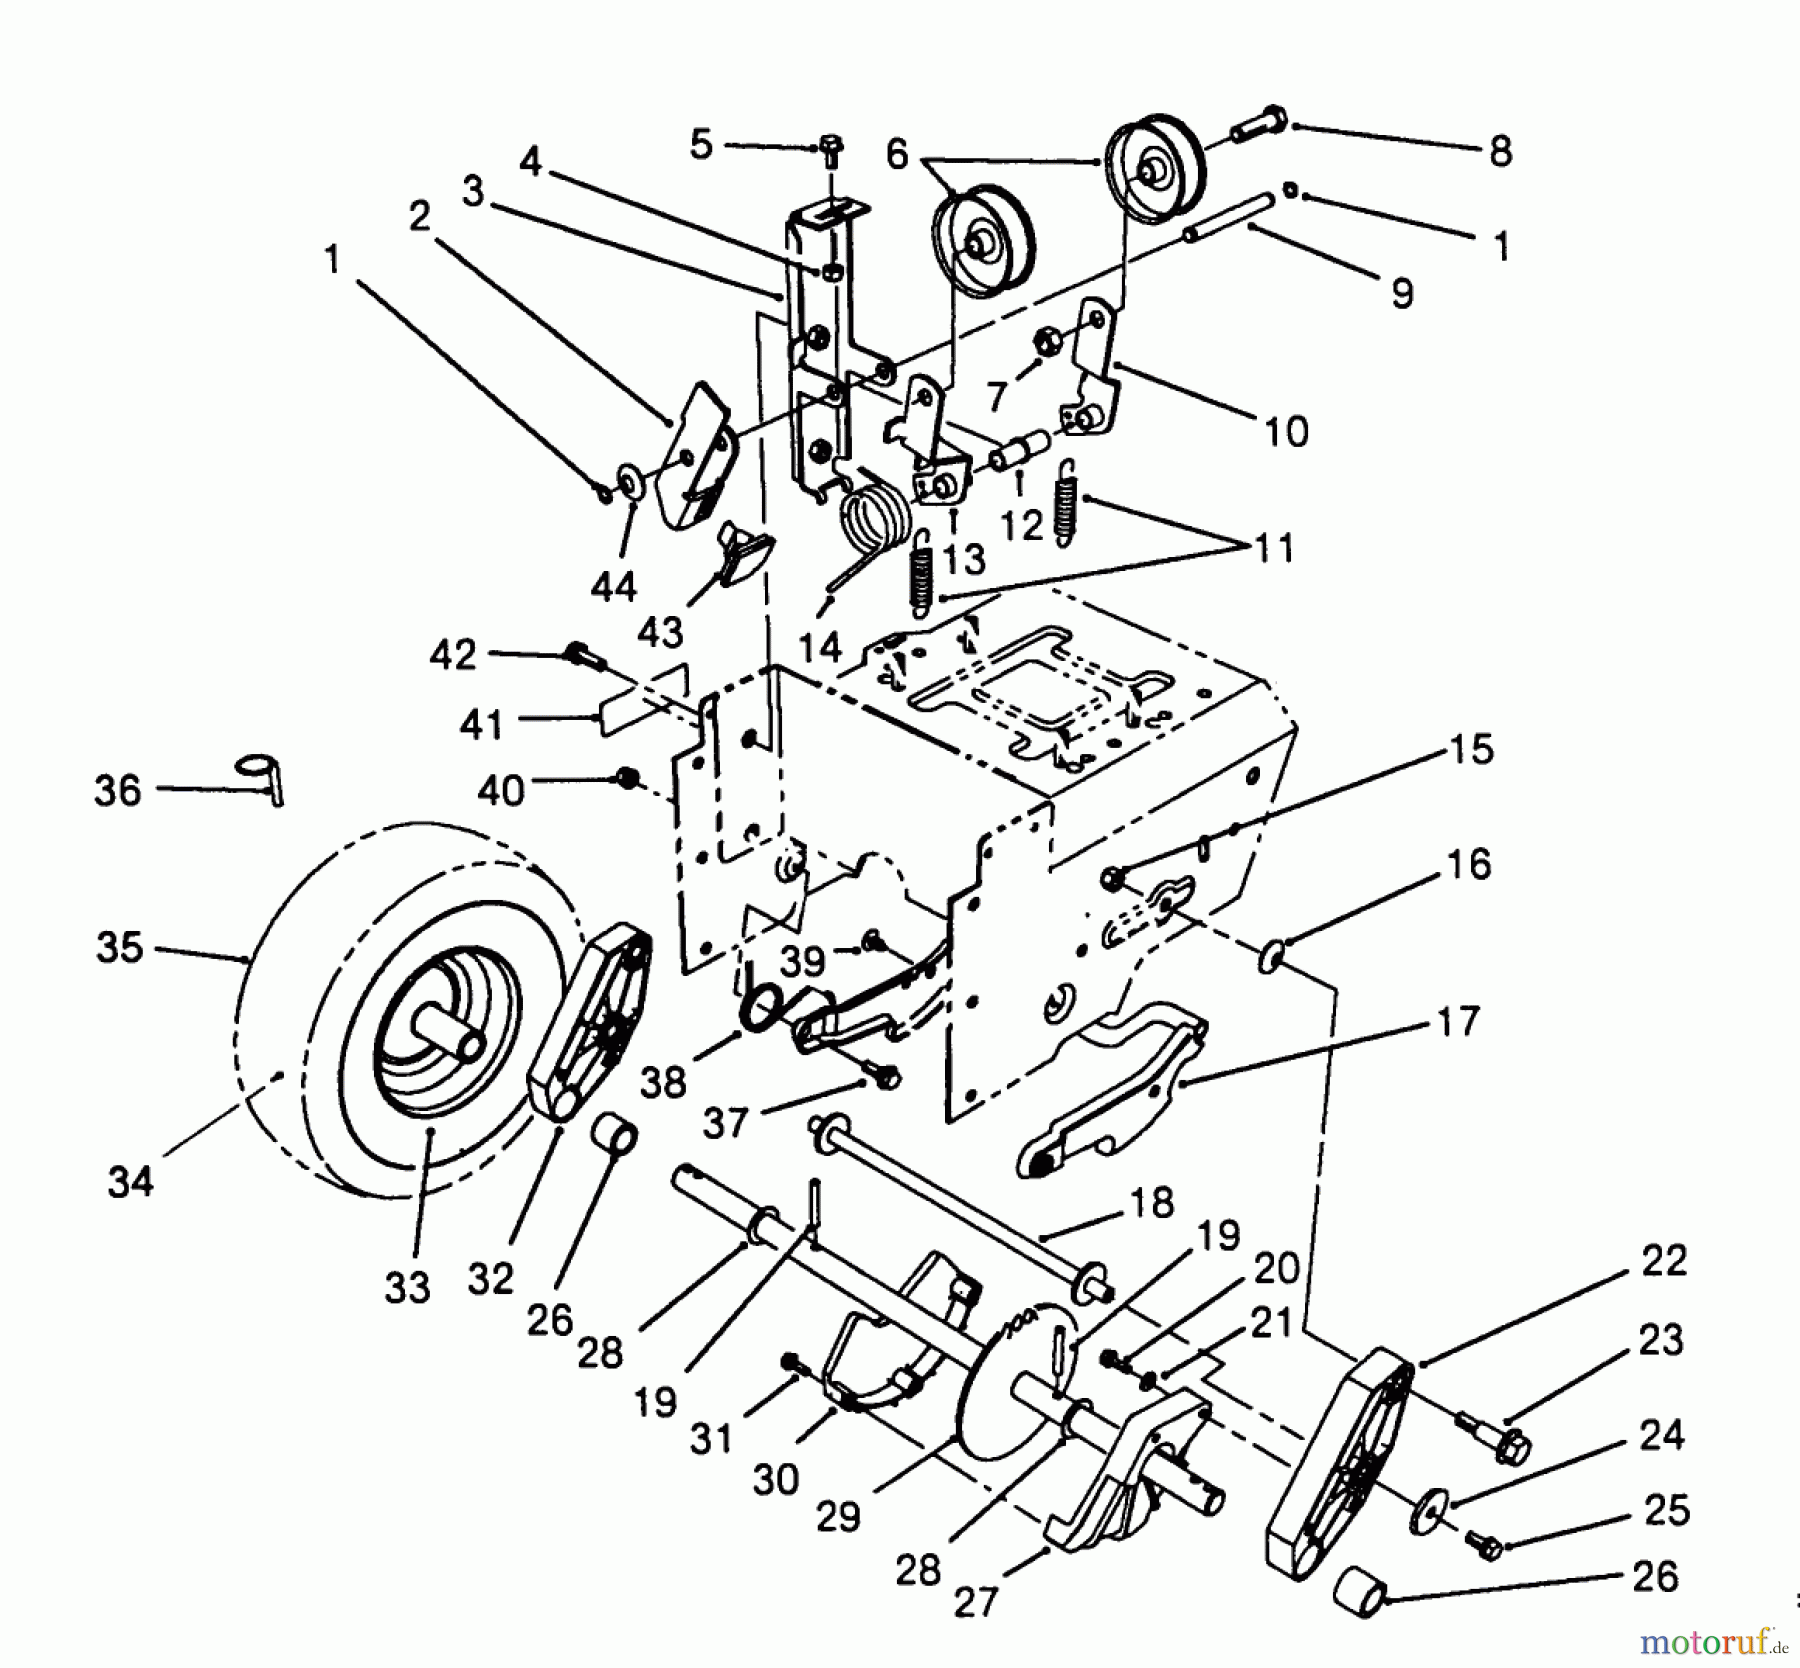  Toro Neu Snow Blowers/Snow Throwers Seite 1 38510 (624) - Toro 624 Power Shift Snowthrower, 1988 (8000001-8999999) TRACTION DRIVE ASSEMBLY